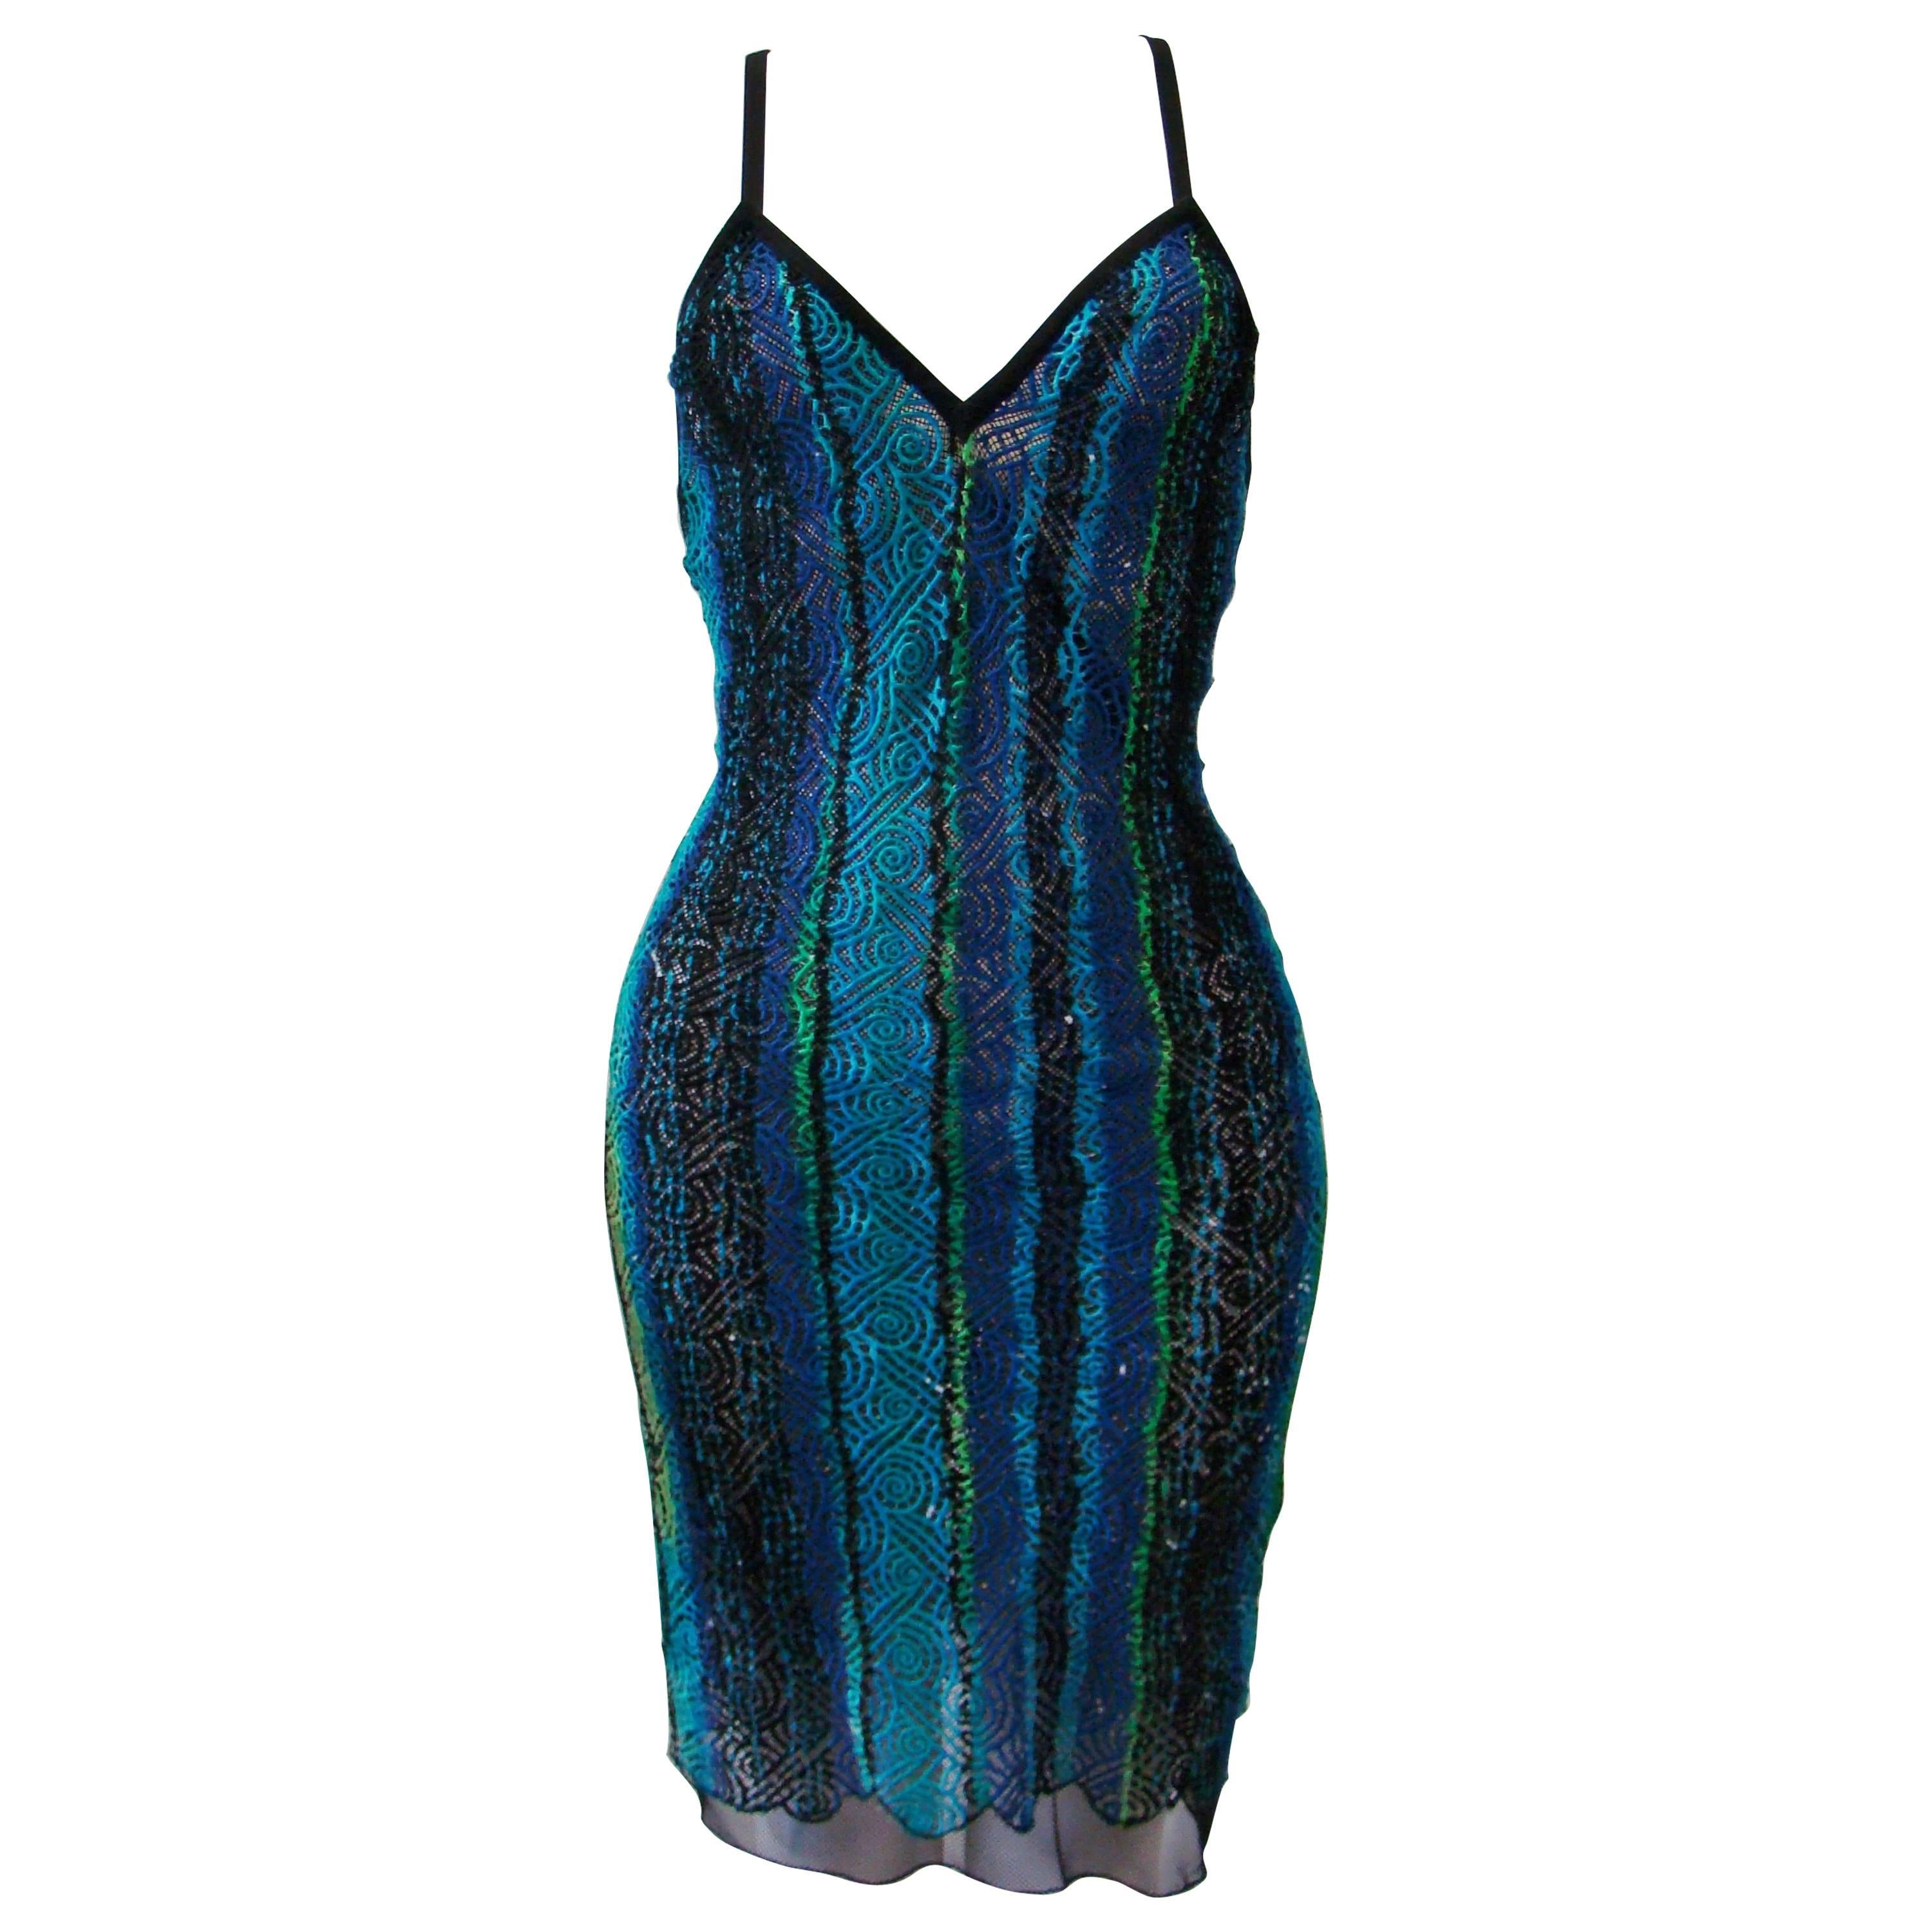 Gianni Versace Couture Multi-Coloured Threaded Dress With Net Spring, 1994 For Sale